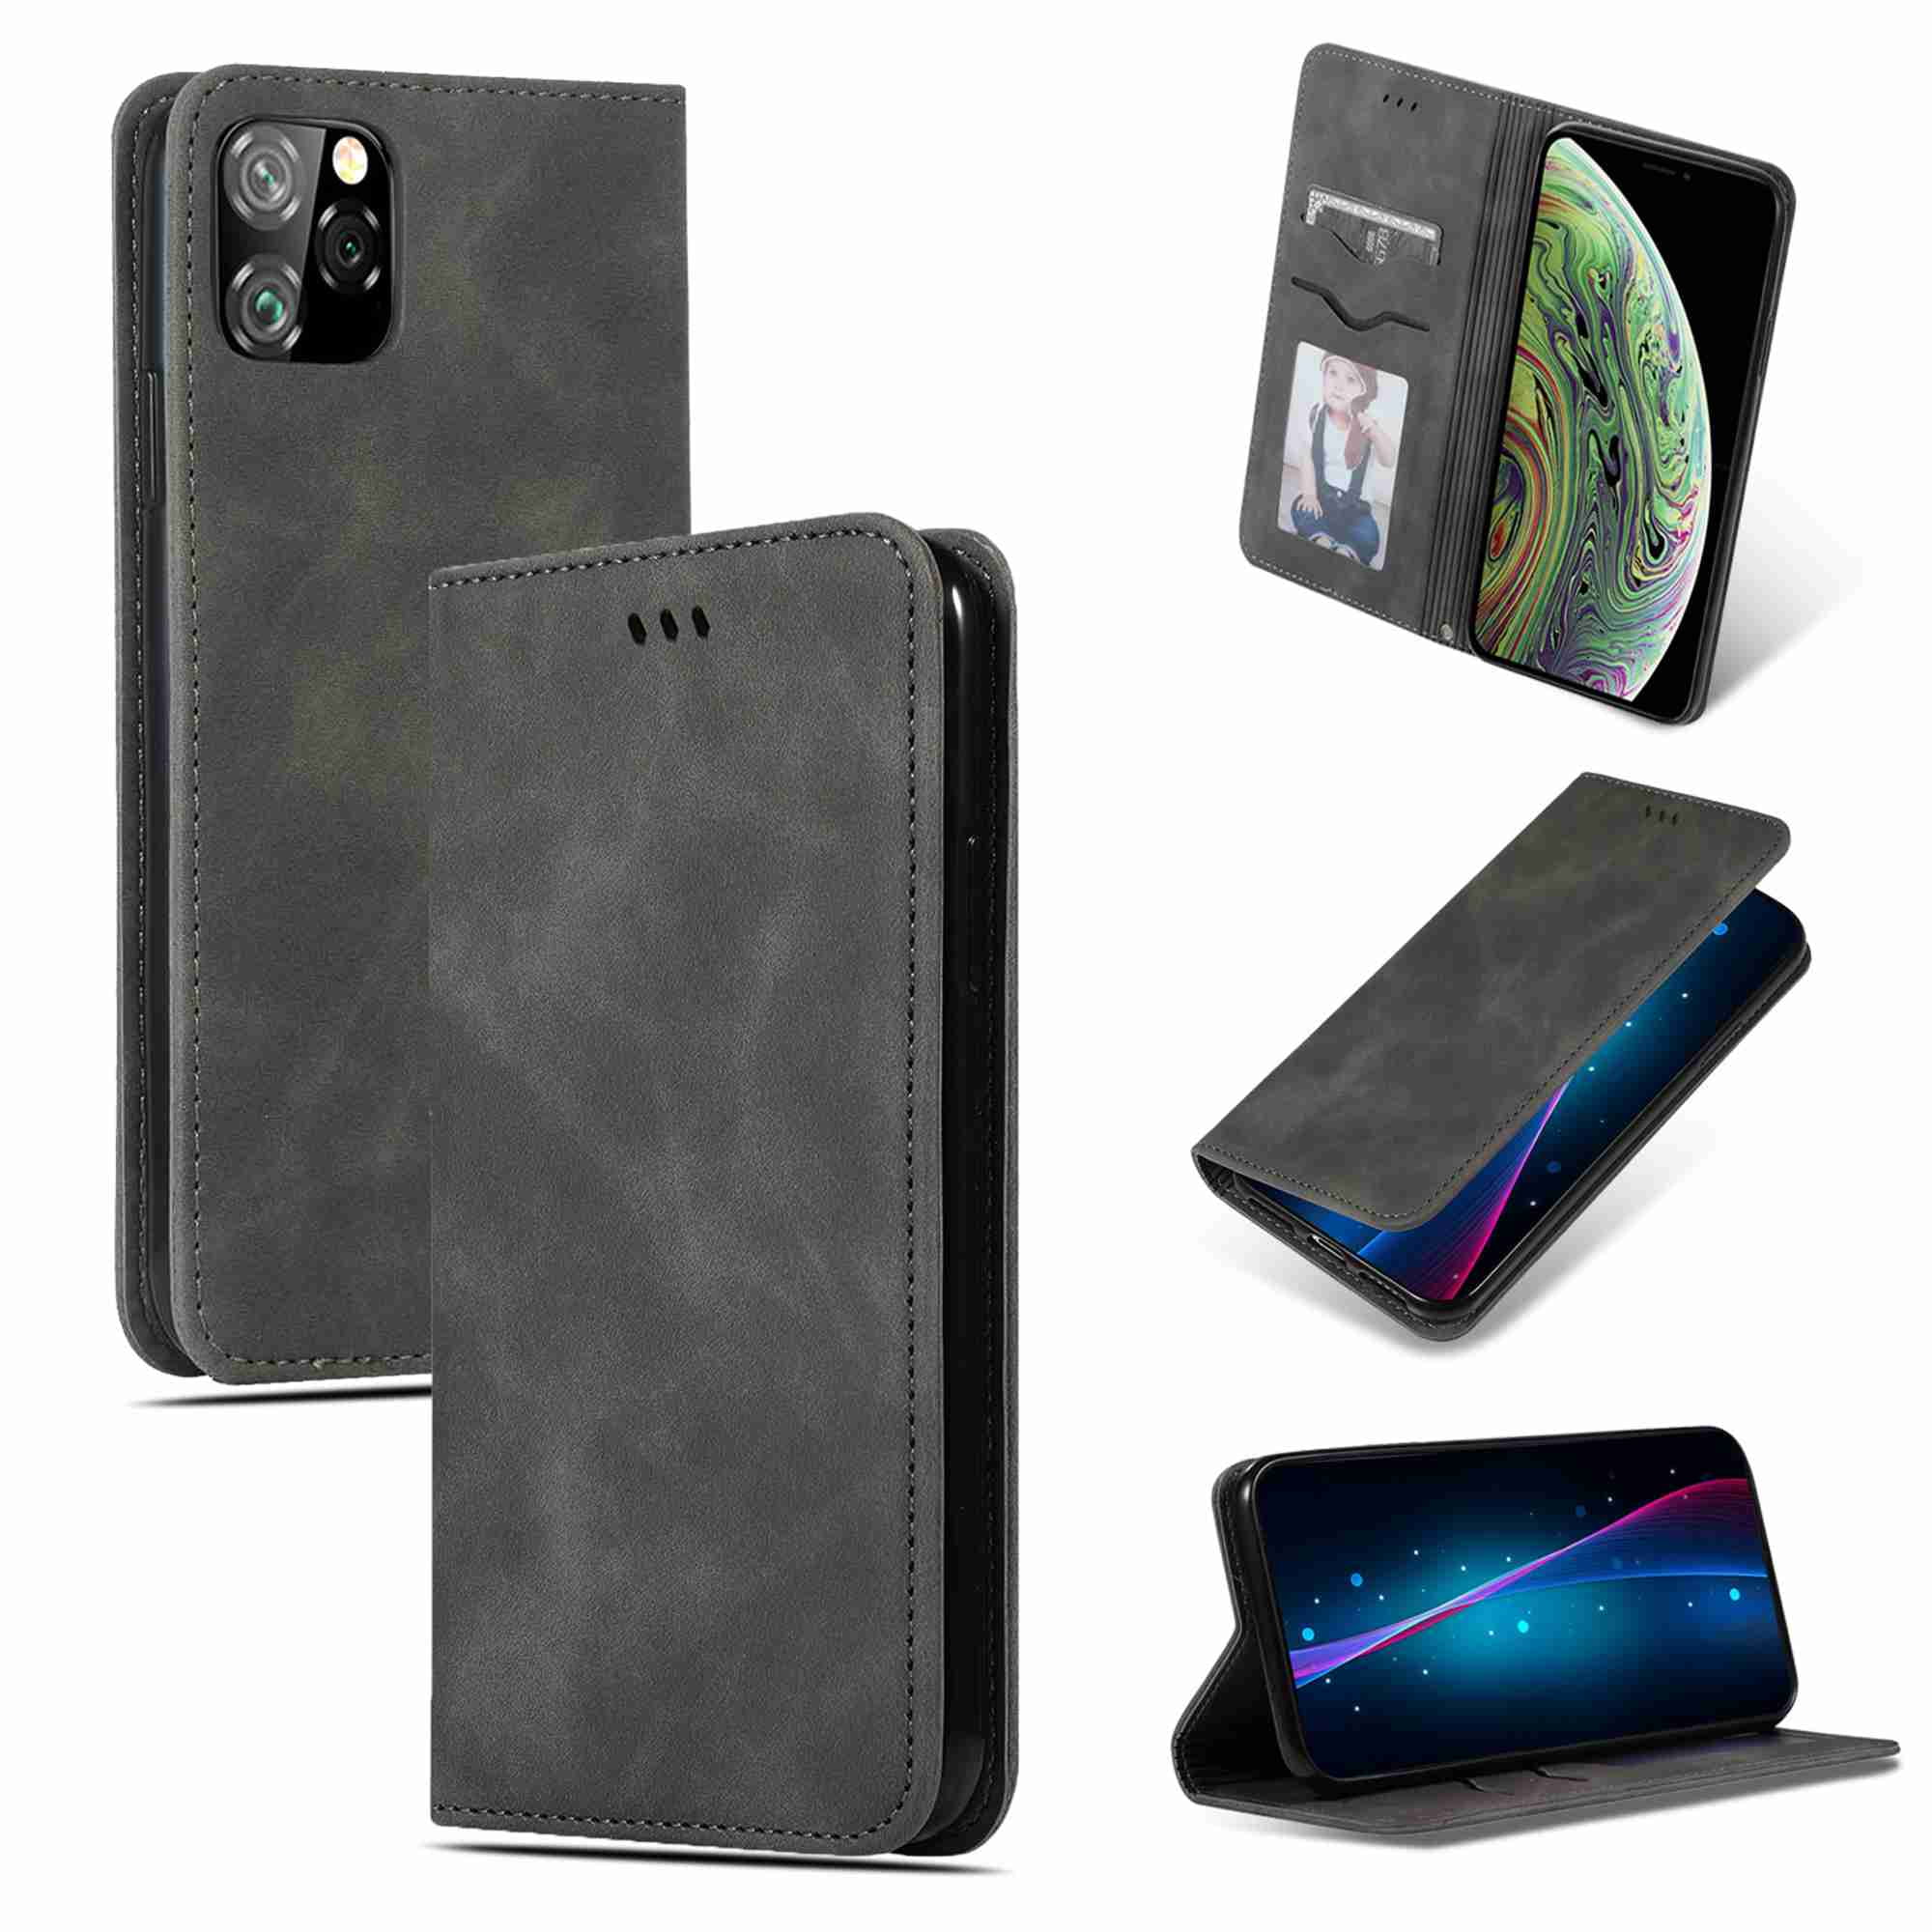 iPhone 8 Flip Case Cover for iPhone 8 Leather Wallet Cover Kickstand Extra-Protective Business Card Holders with Free Waterproof-Bag Fashion 